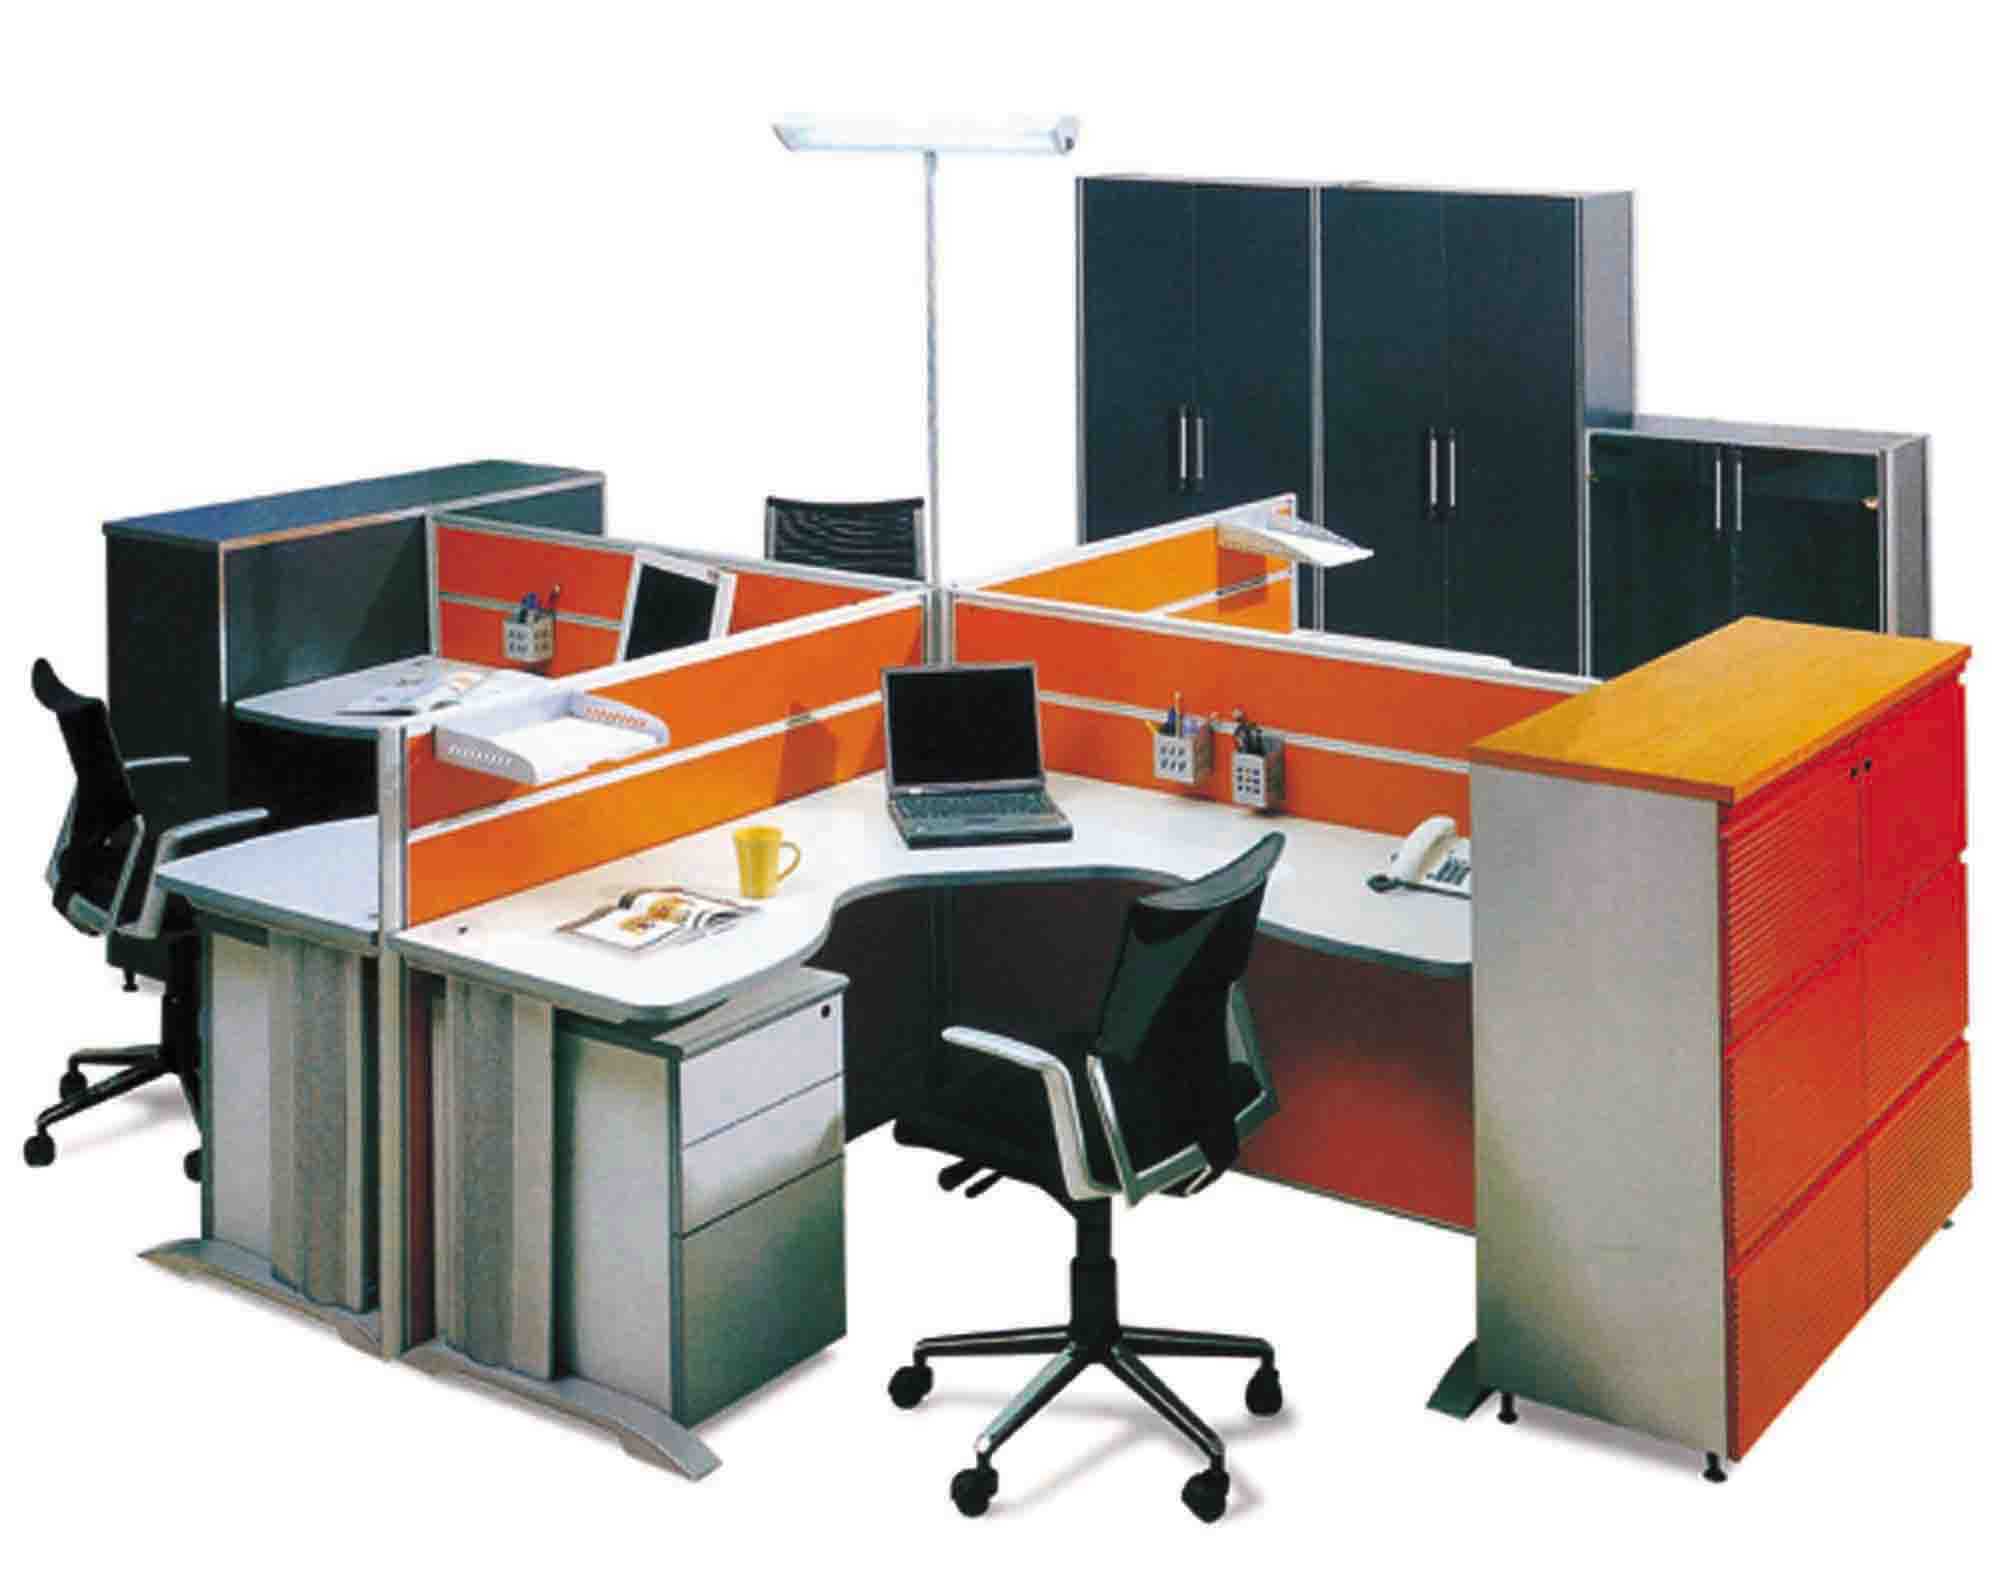 Free Office Furniture Cliparts, Download Free Clip Art, Free